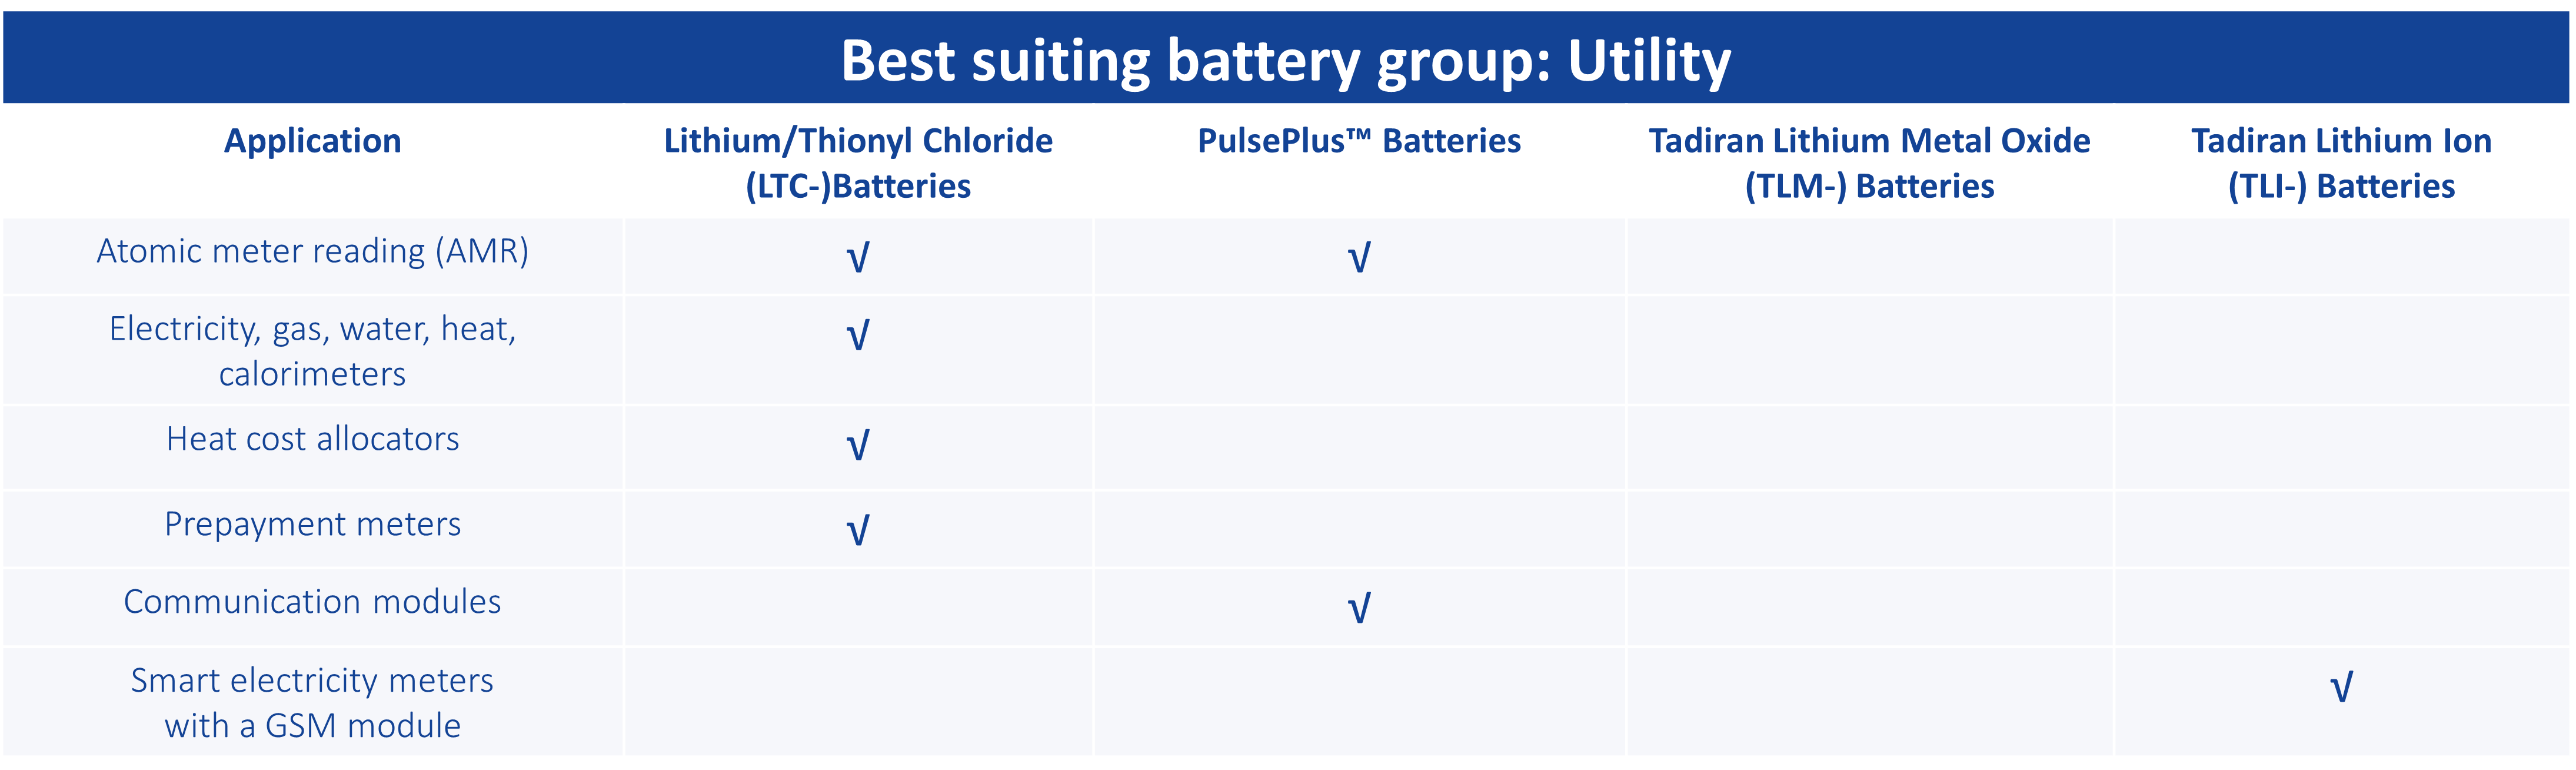 Batteries for Utility Applications